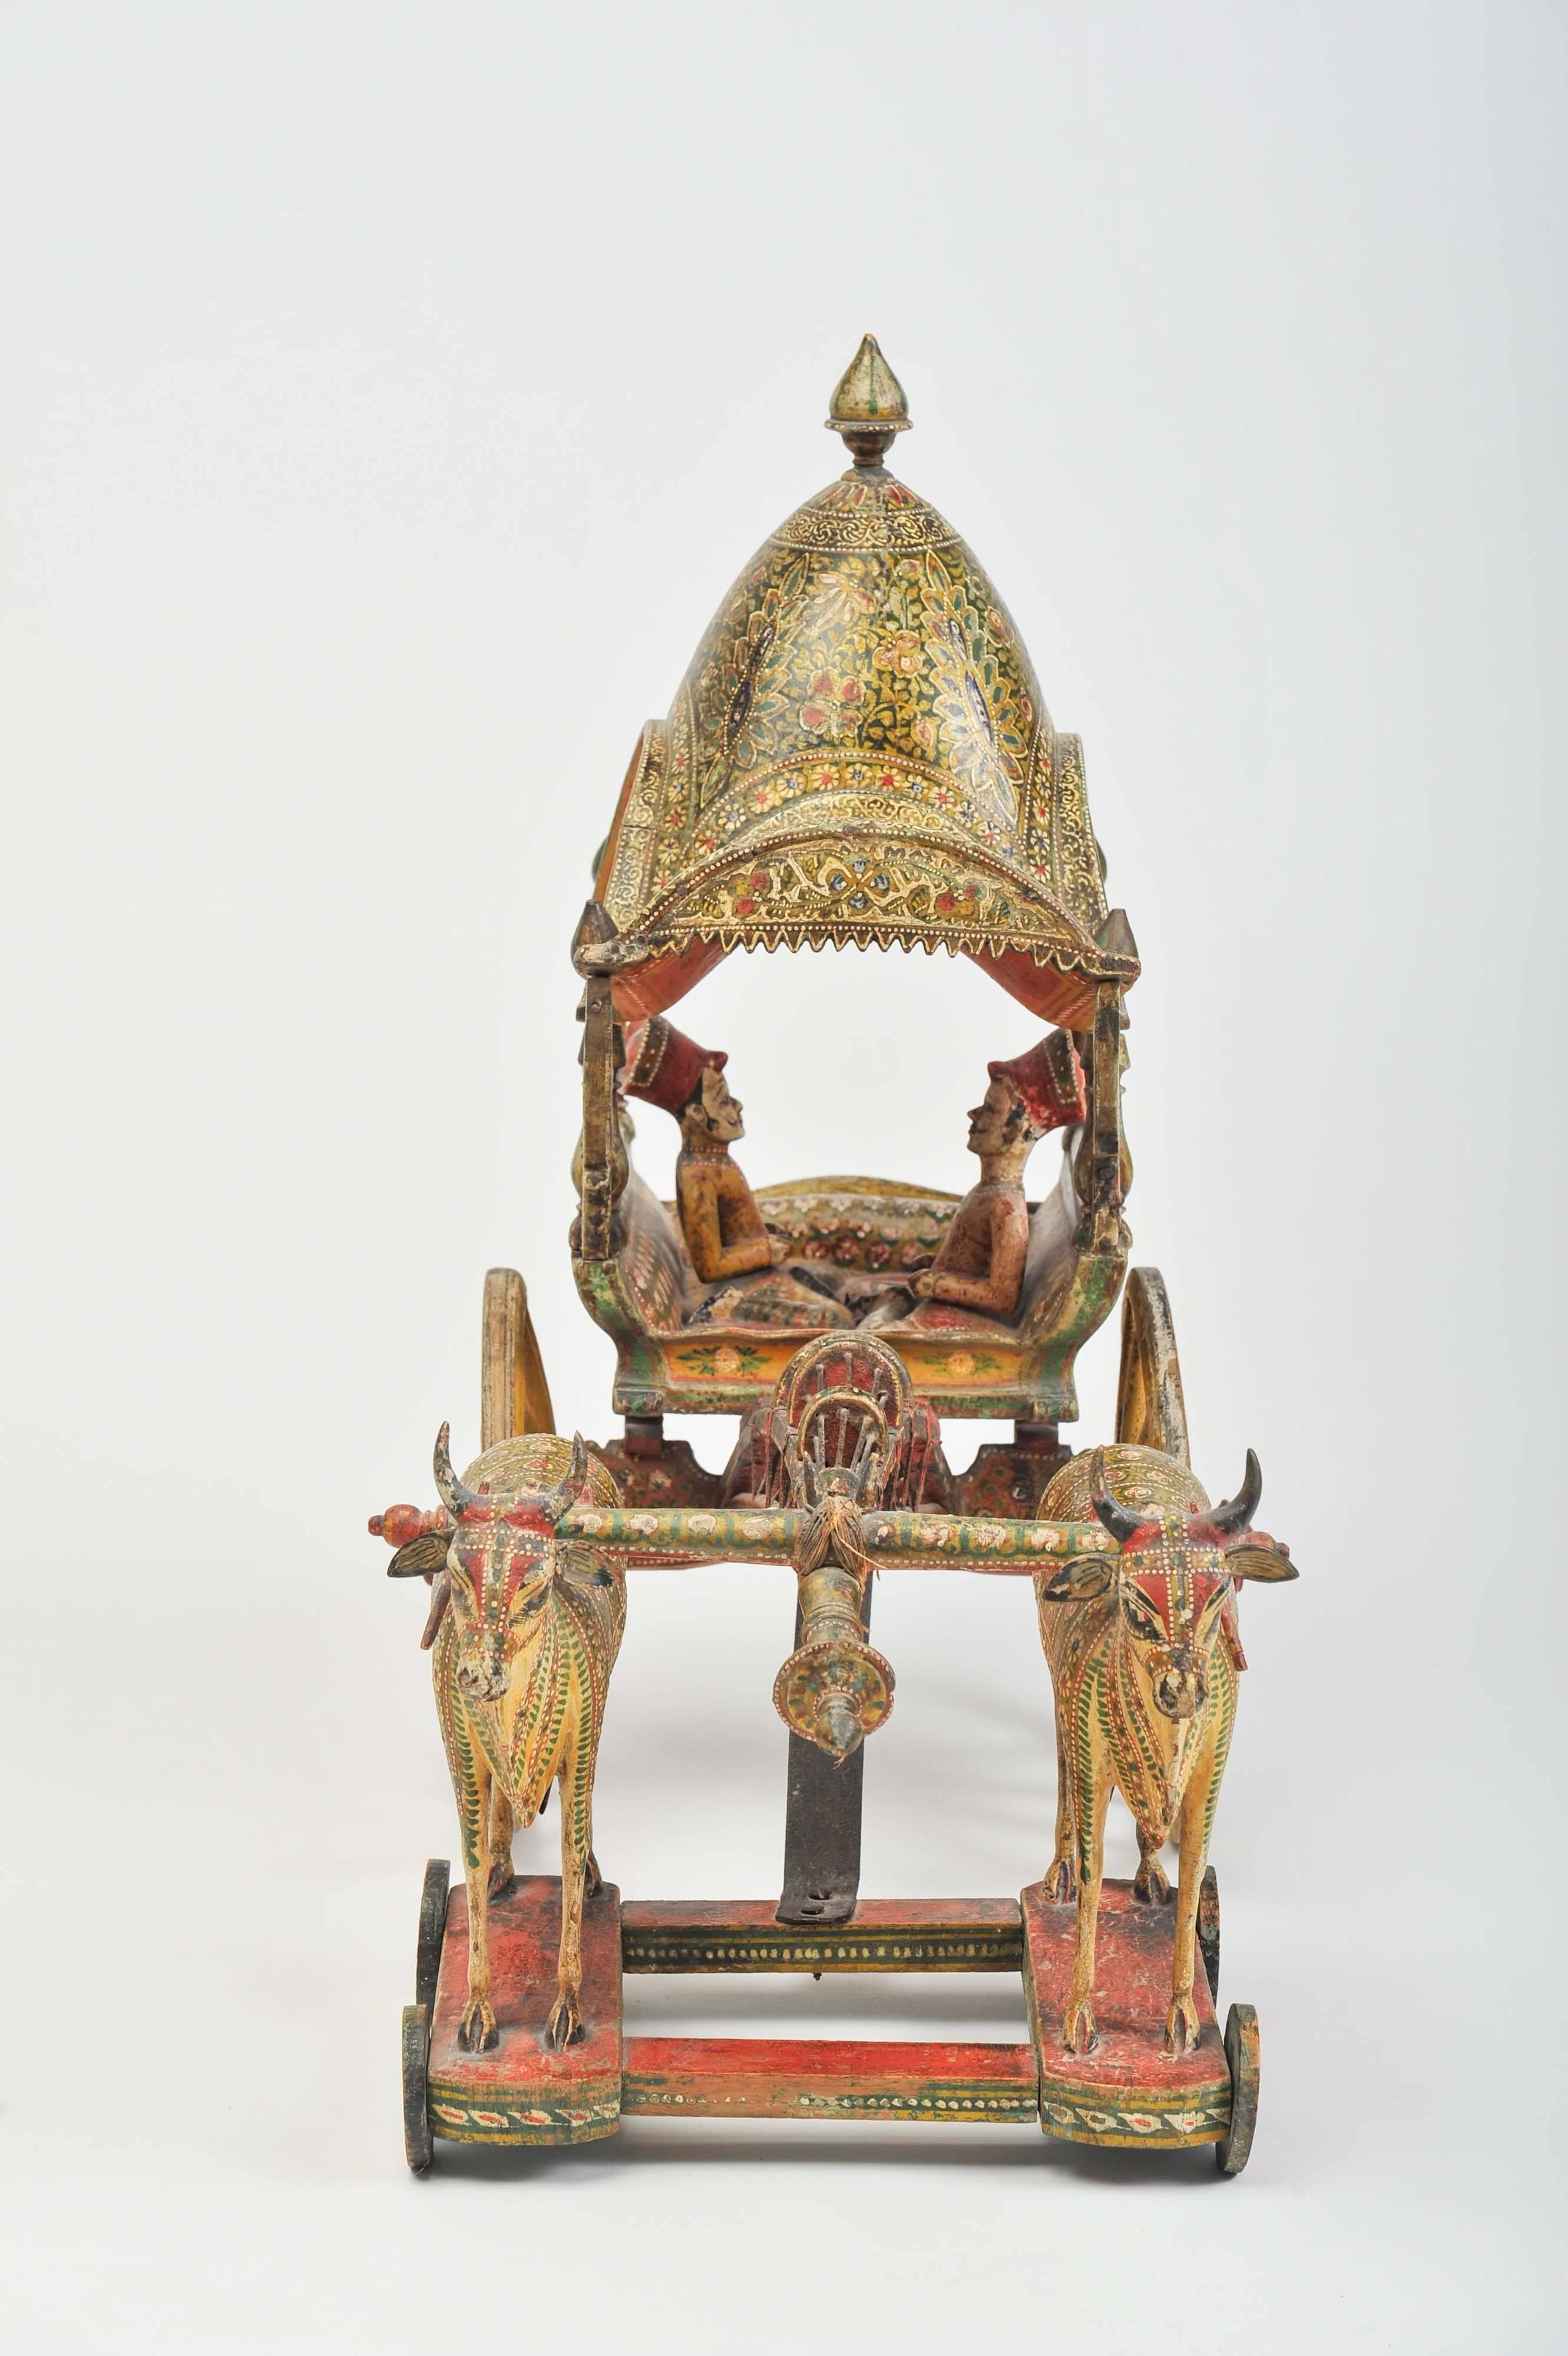 An elaborate and superbly detailed early 20th century Kashmiri model of an Ox and cart realistically modelled with two turbaned men sitting crossed-legged in the carriage drawn by two oxen, the carriage and beam with chiselled boteh and overall